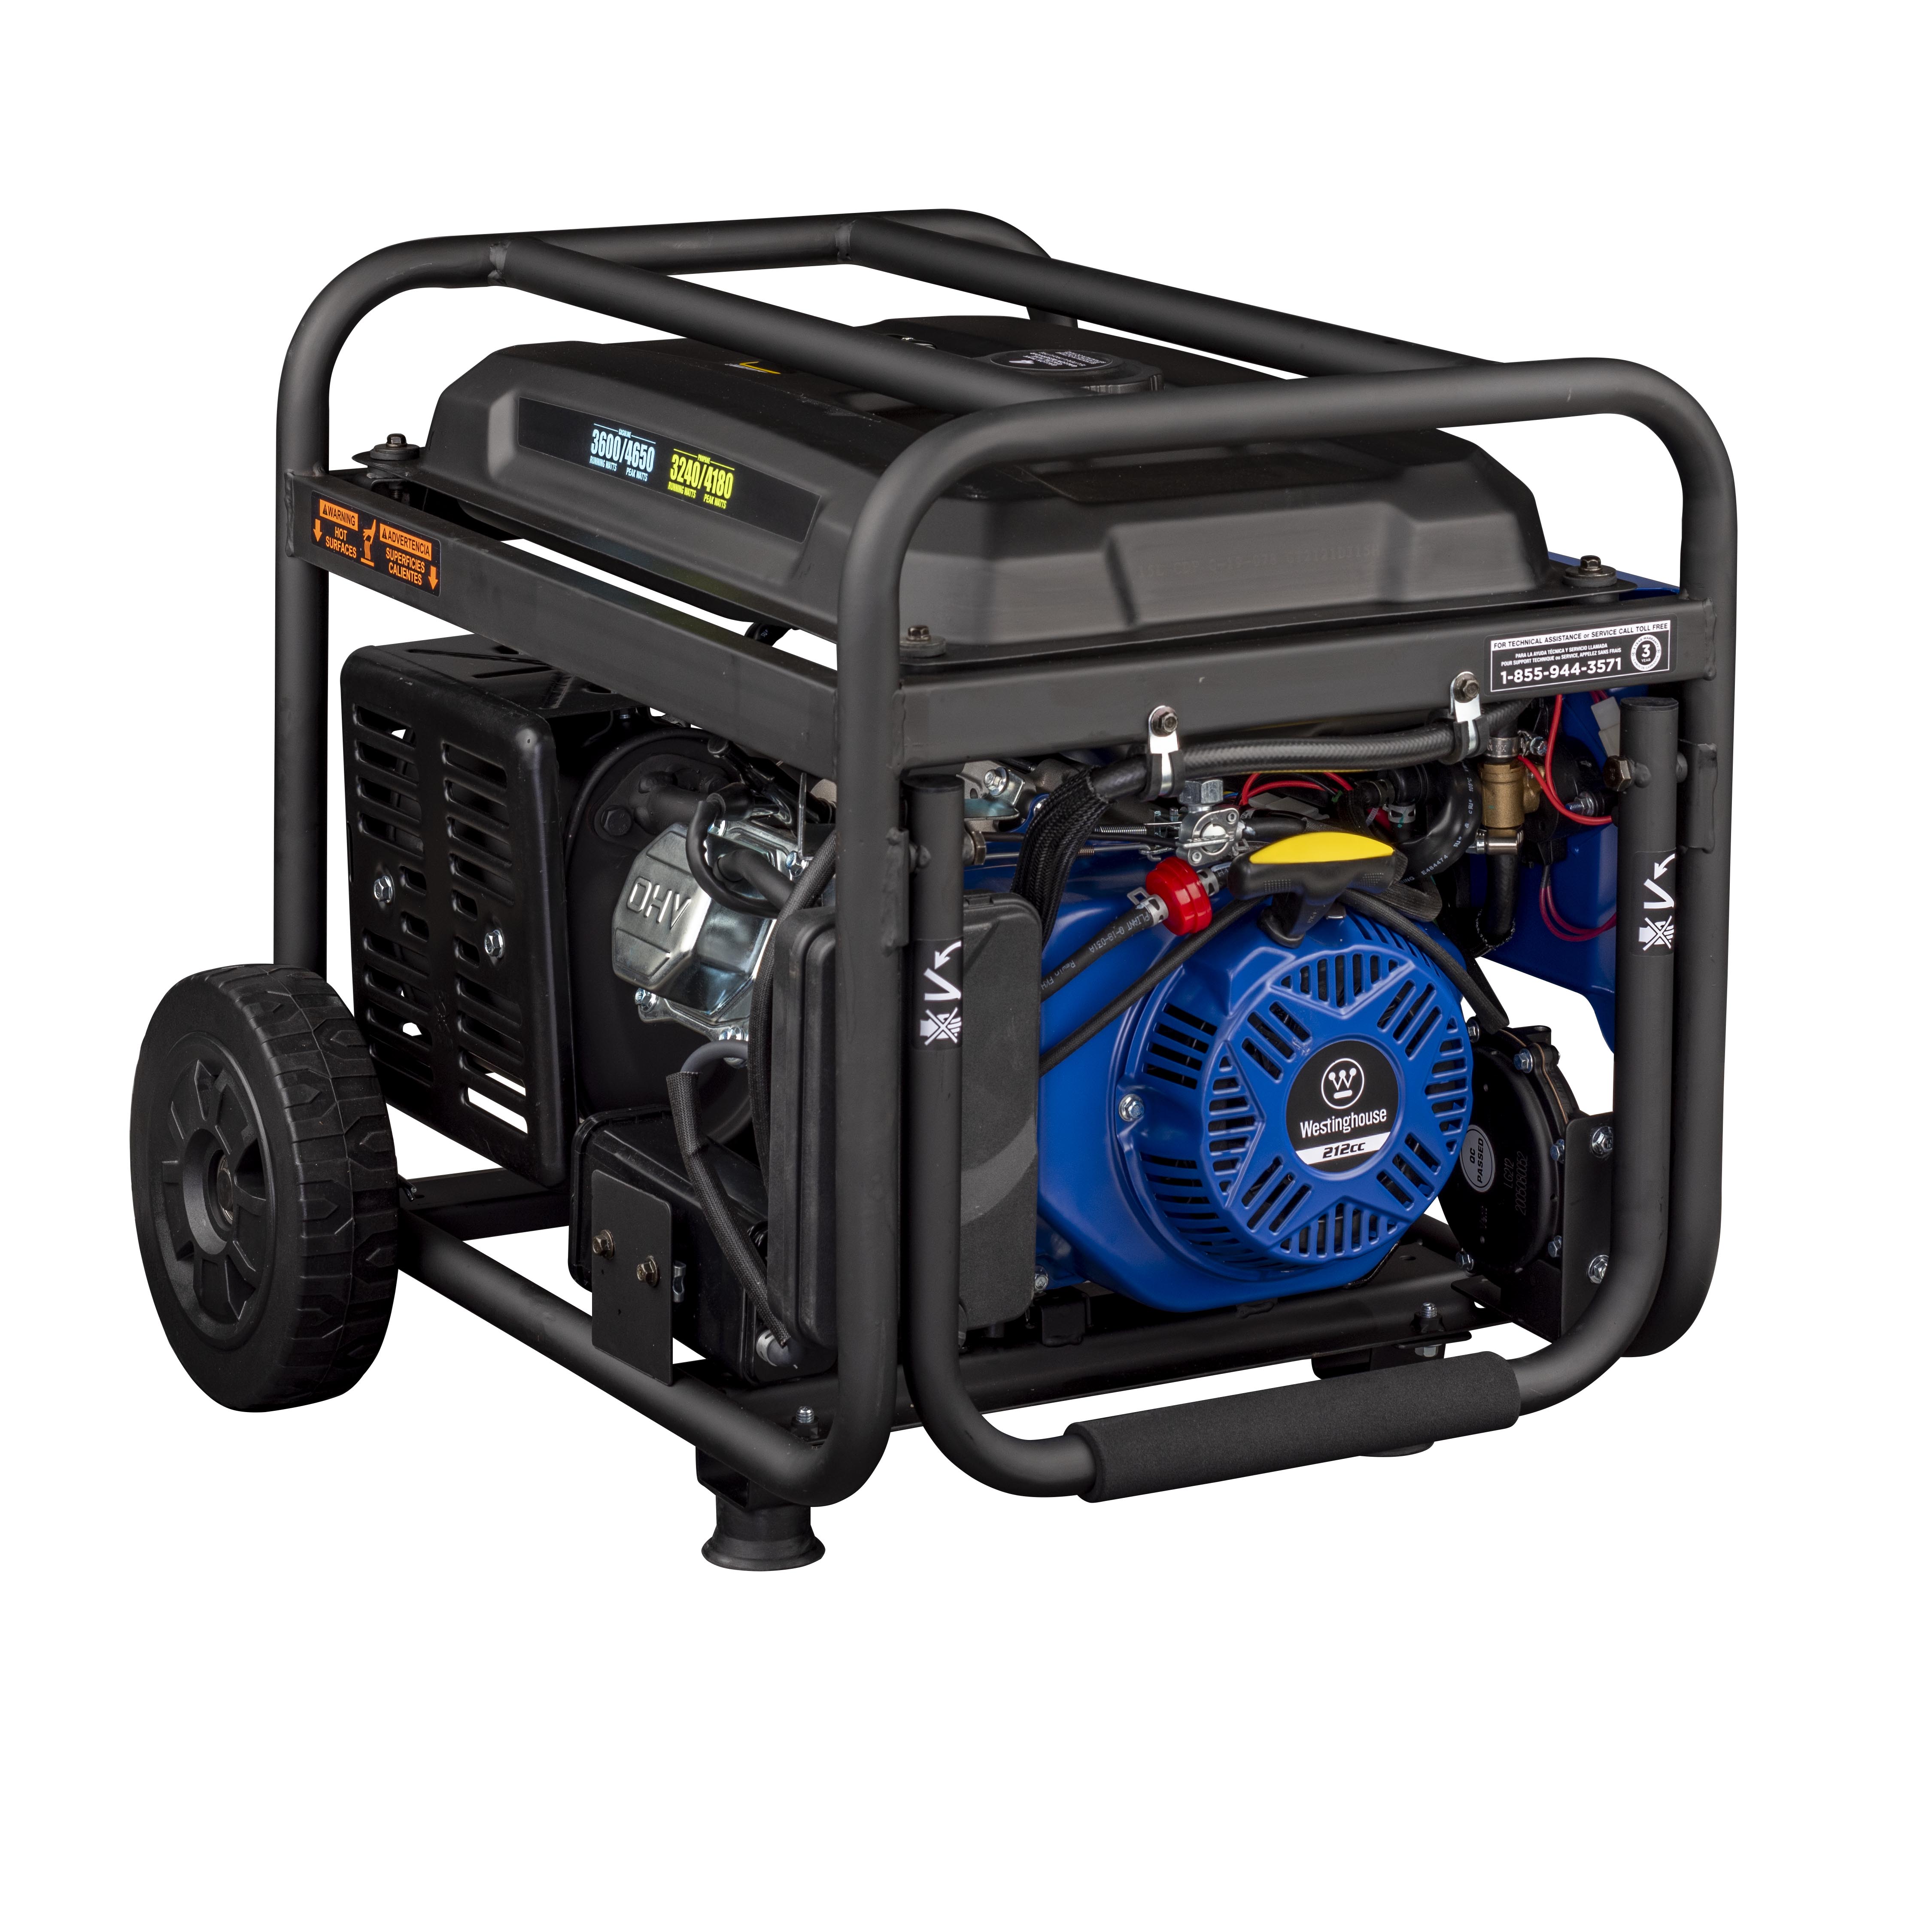 Gas and Propane Electric Start Portable Generator Westinghouse WGen3600DF Dual Fuel 3600 Rated Watts & 4650 Peak Watts 